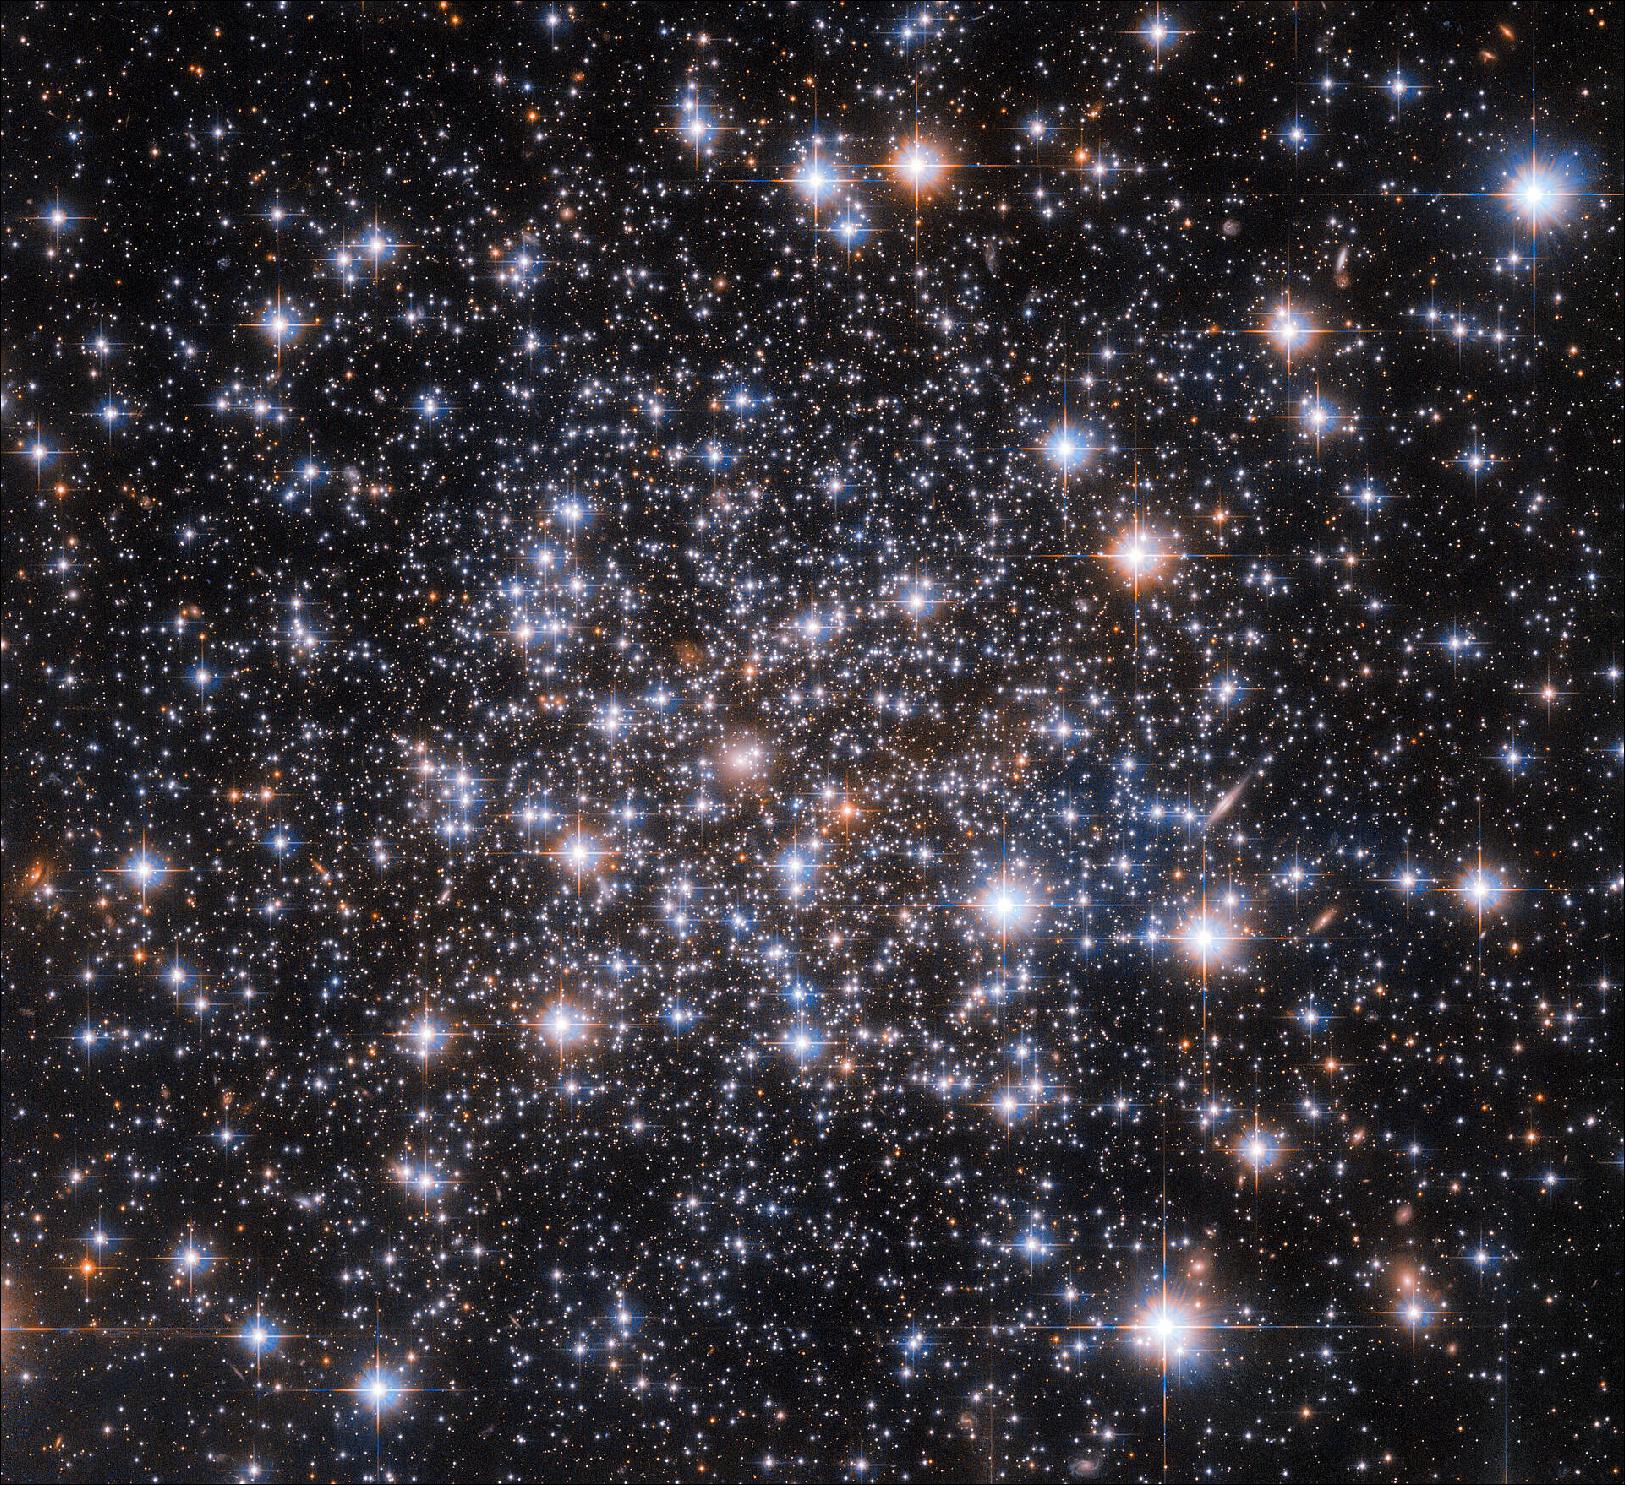 Figure 25: Hubble captured this star-studded image using one of its most versatile instruments; the Advanced Camera for Surveys (ACS). Much like the stars in globular clusters, Hubble’s instruments also have distinct generations: ACS is a third generation instrument which replaced the original Faint Object Camera in 2002. Some of Hubble’s other instruments have also gone through three iterations: the Wide Field Camera 3 replaced the Wide Field and Planetary Camera 2 (WFPC2) during the final servicing mission to Hubble. WFPC2 itself replaced the original Wide Field and Planetary Camera, which was installed on Hubble at launch (image credit: ESA/Hubble & NASA, A. Dotter; CC BY 4.0)